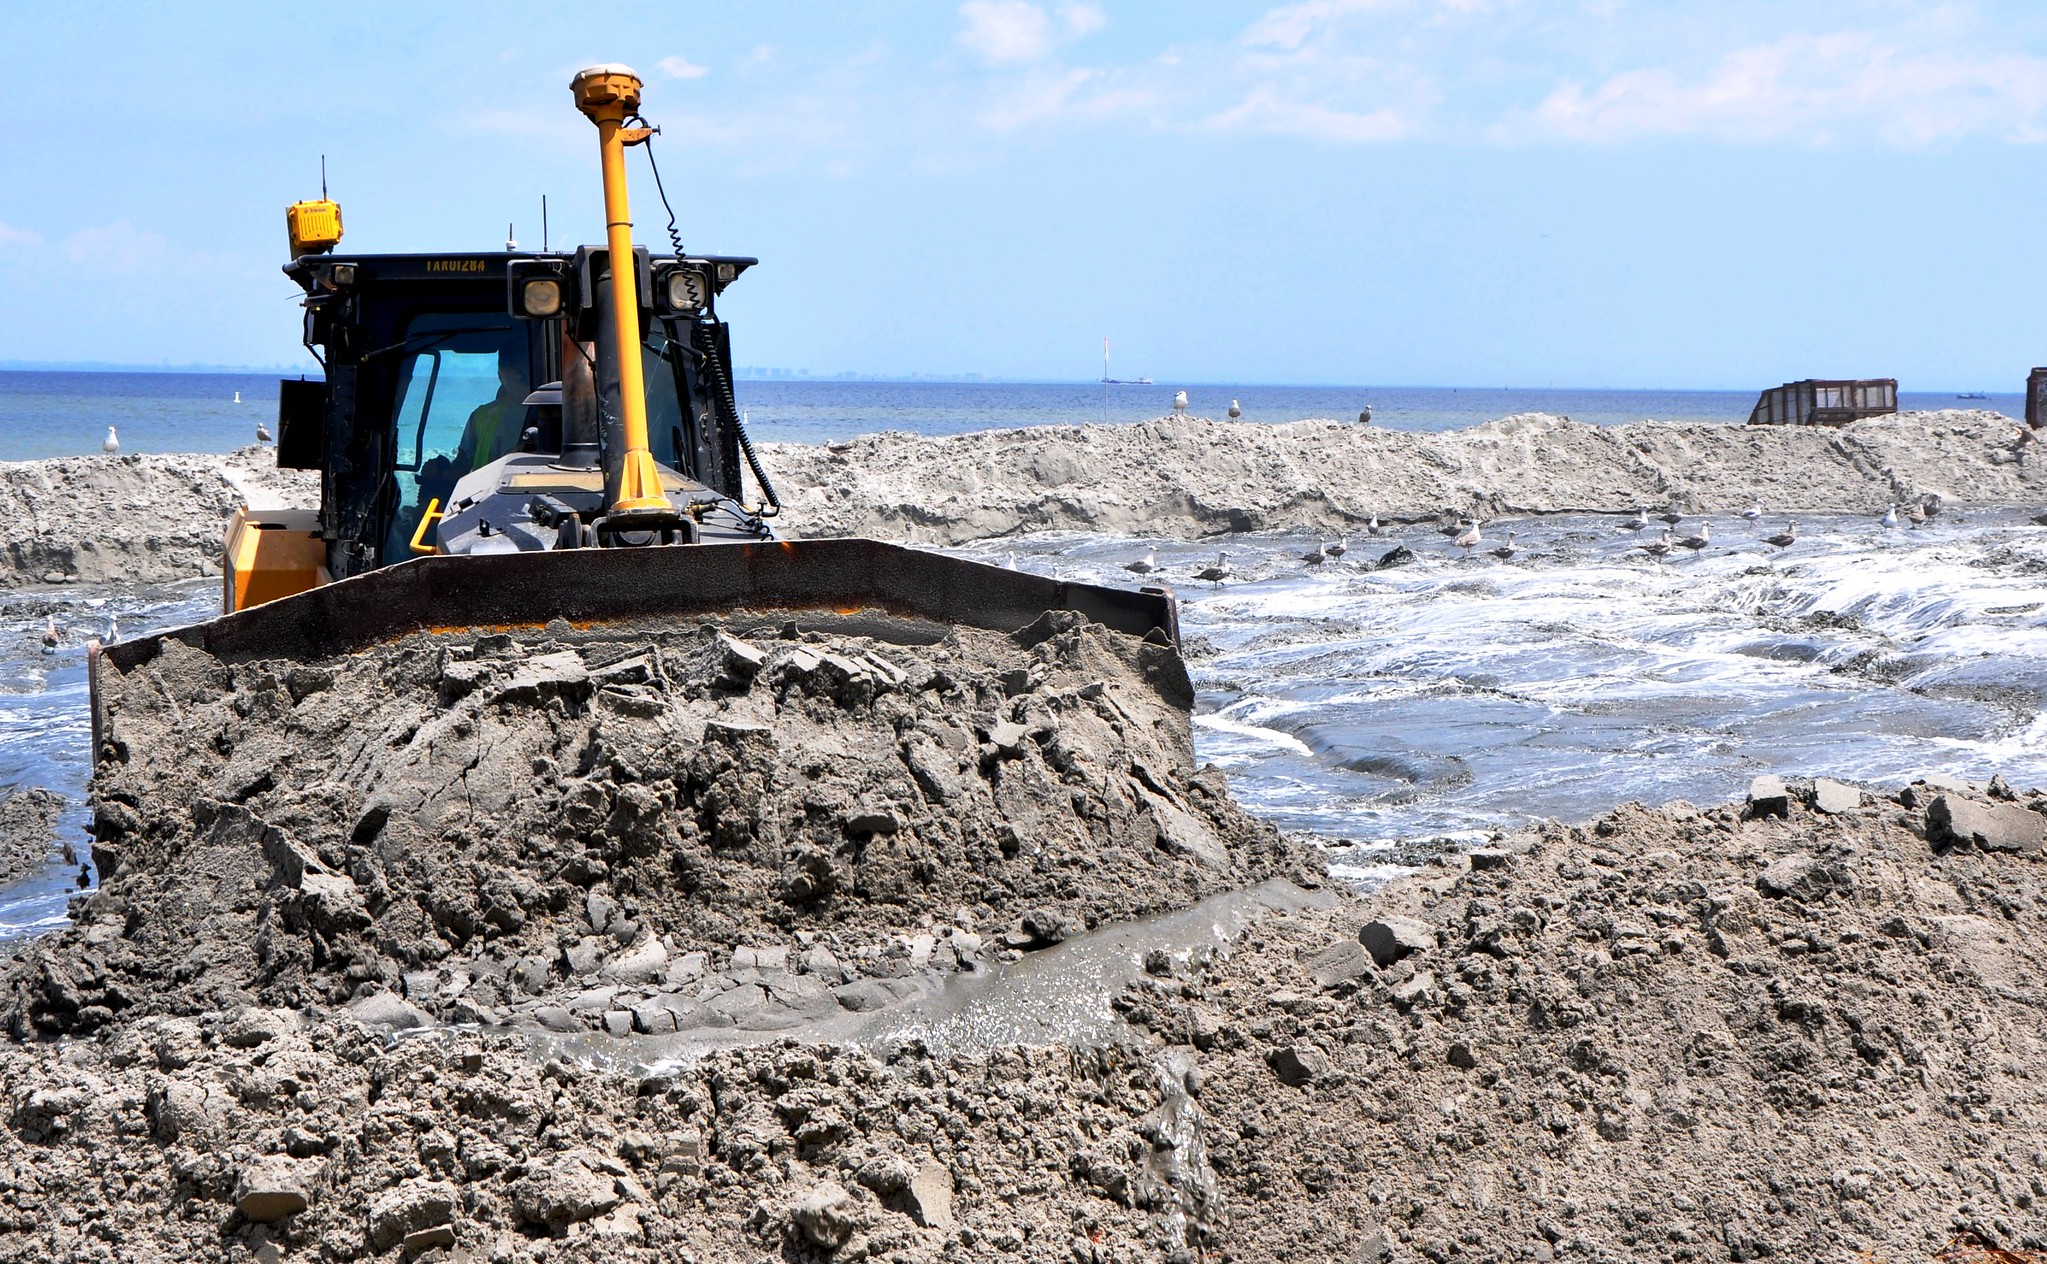 First Phase of Port Monmouth, NJ Coastal Storm Management Project Begins - July 1, 2014 (courtesy of the U.S. Army Corps of Engineers, Public Domain, via Flickr).